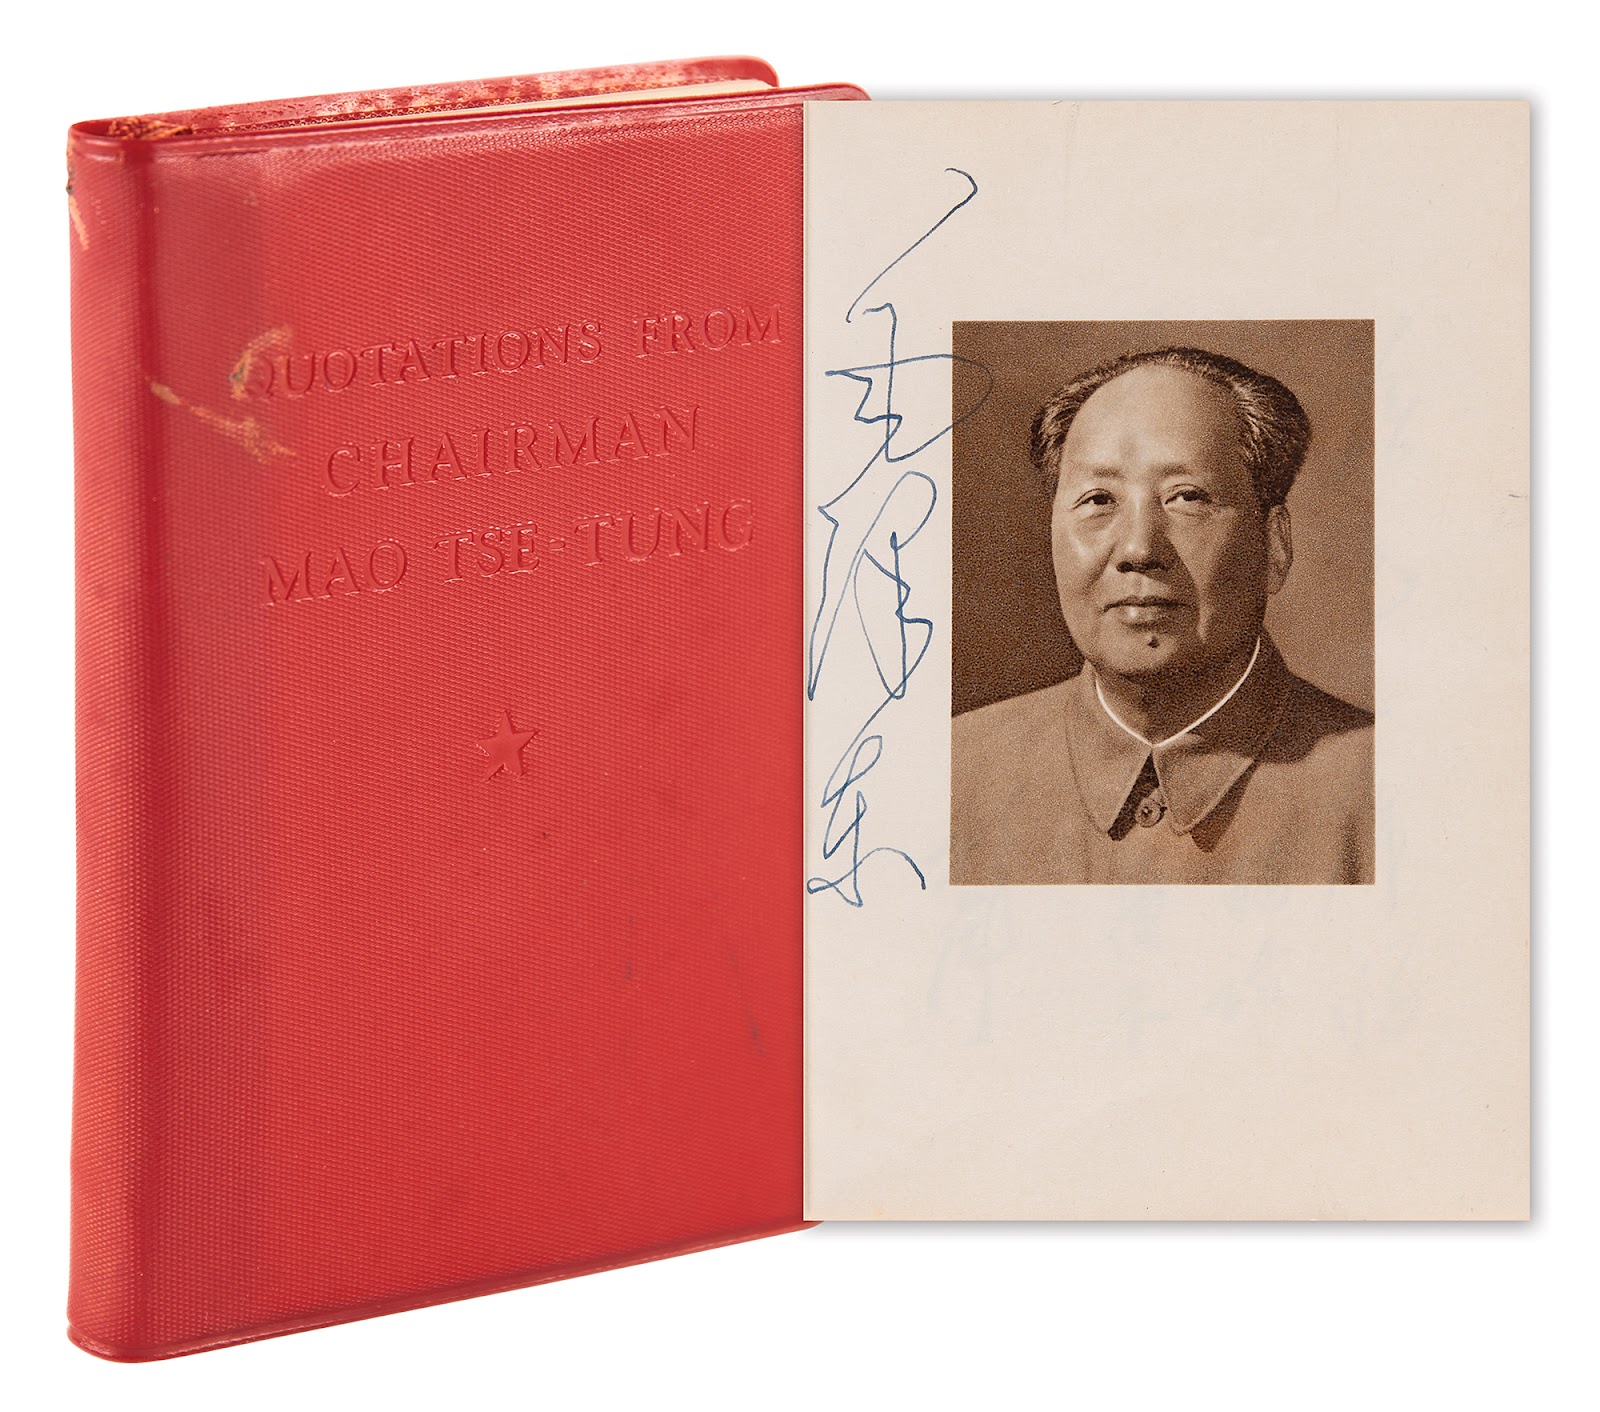 Copy of Quotations from Chairman Mao Zedong featuring the red vinyl covers and Mao’s signature beside his portrait.